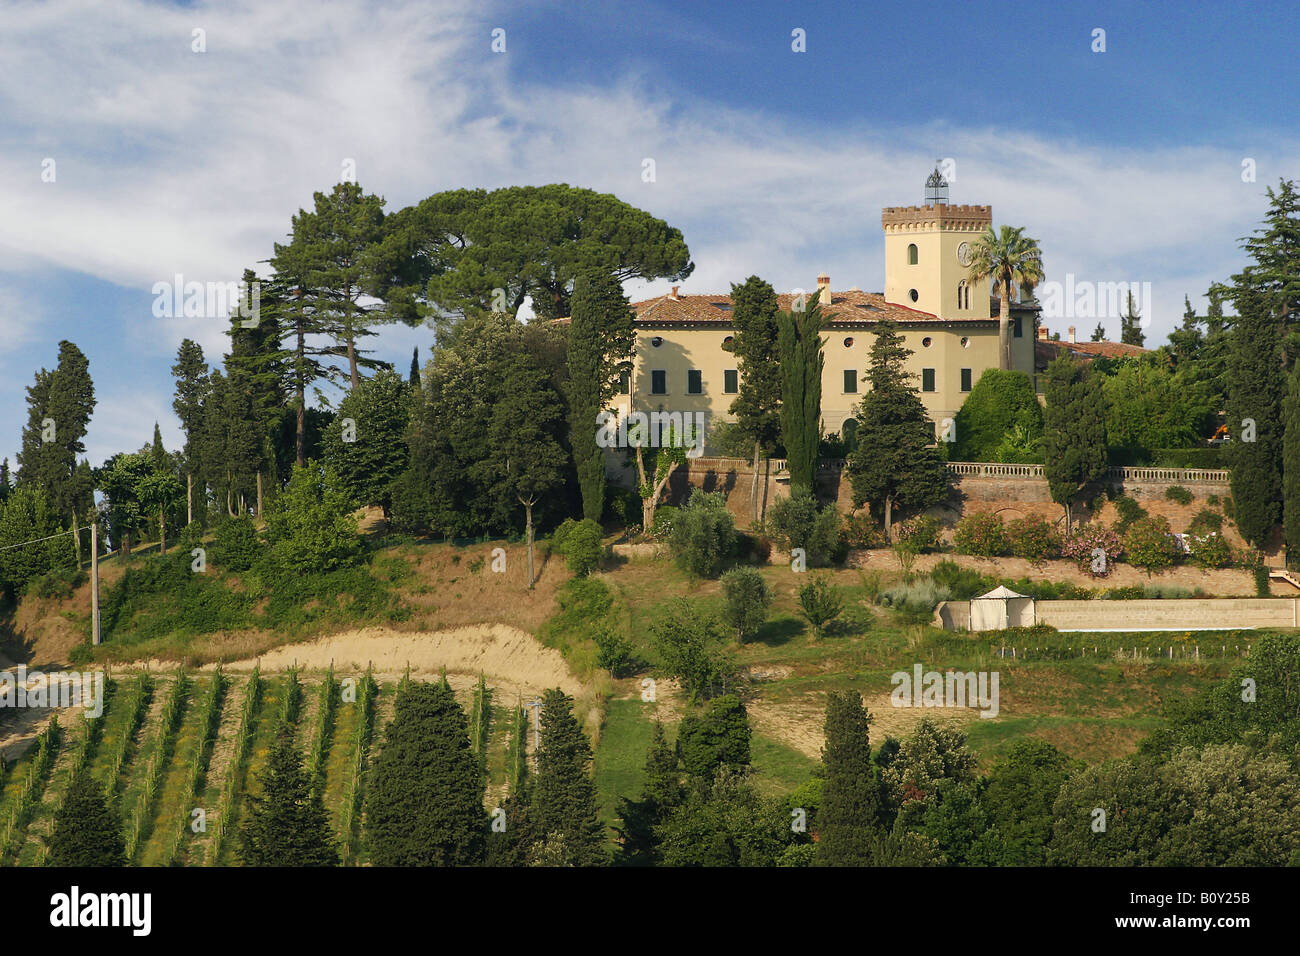 Tuscan landscape with traditional stone building in the distance Stock Photo